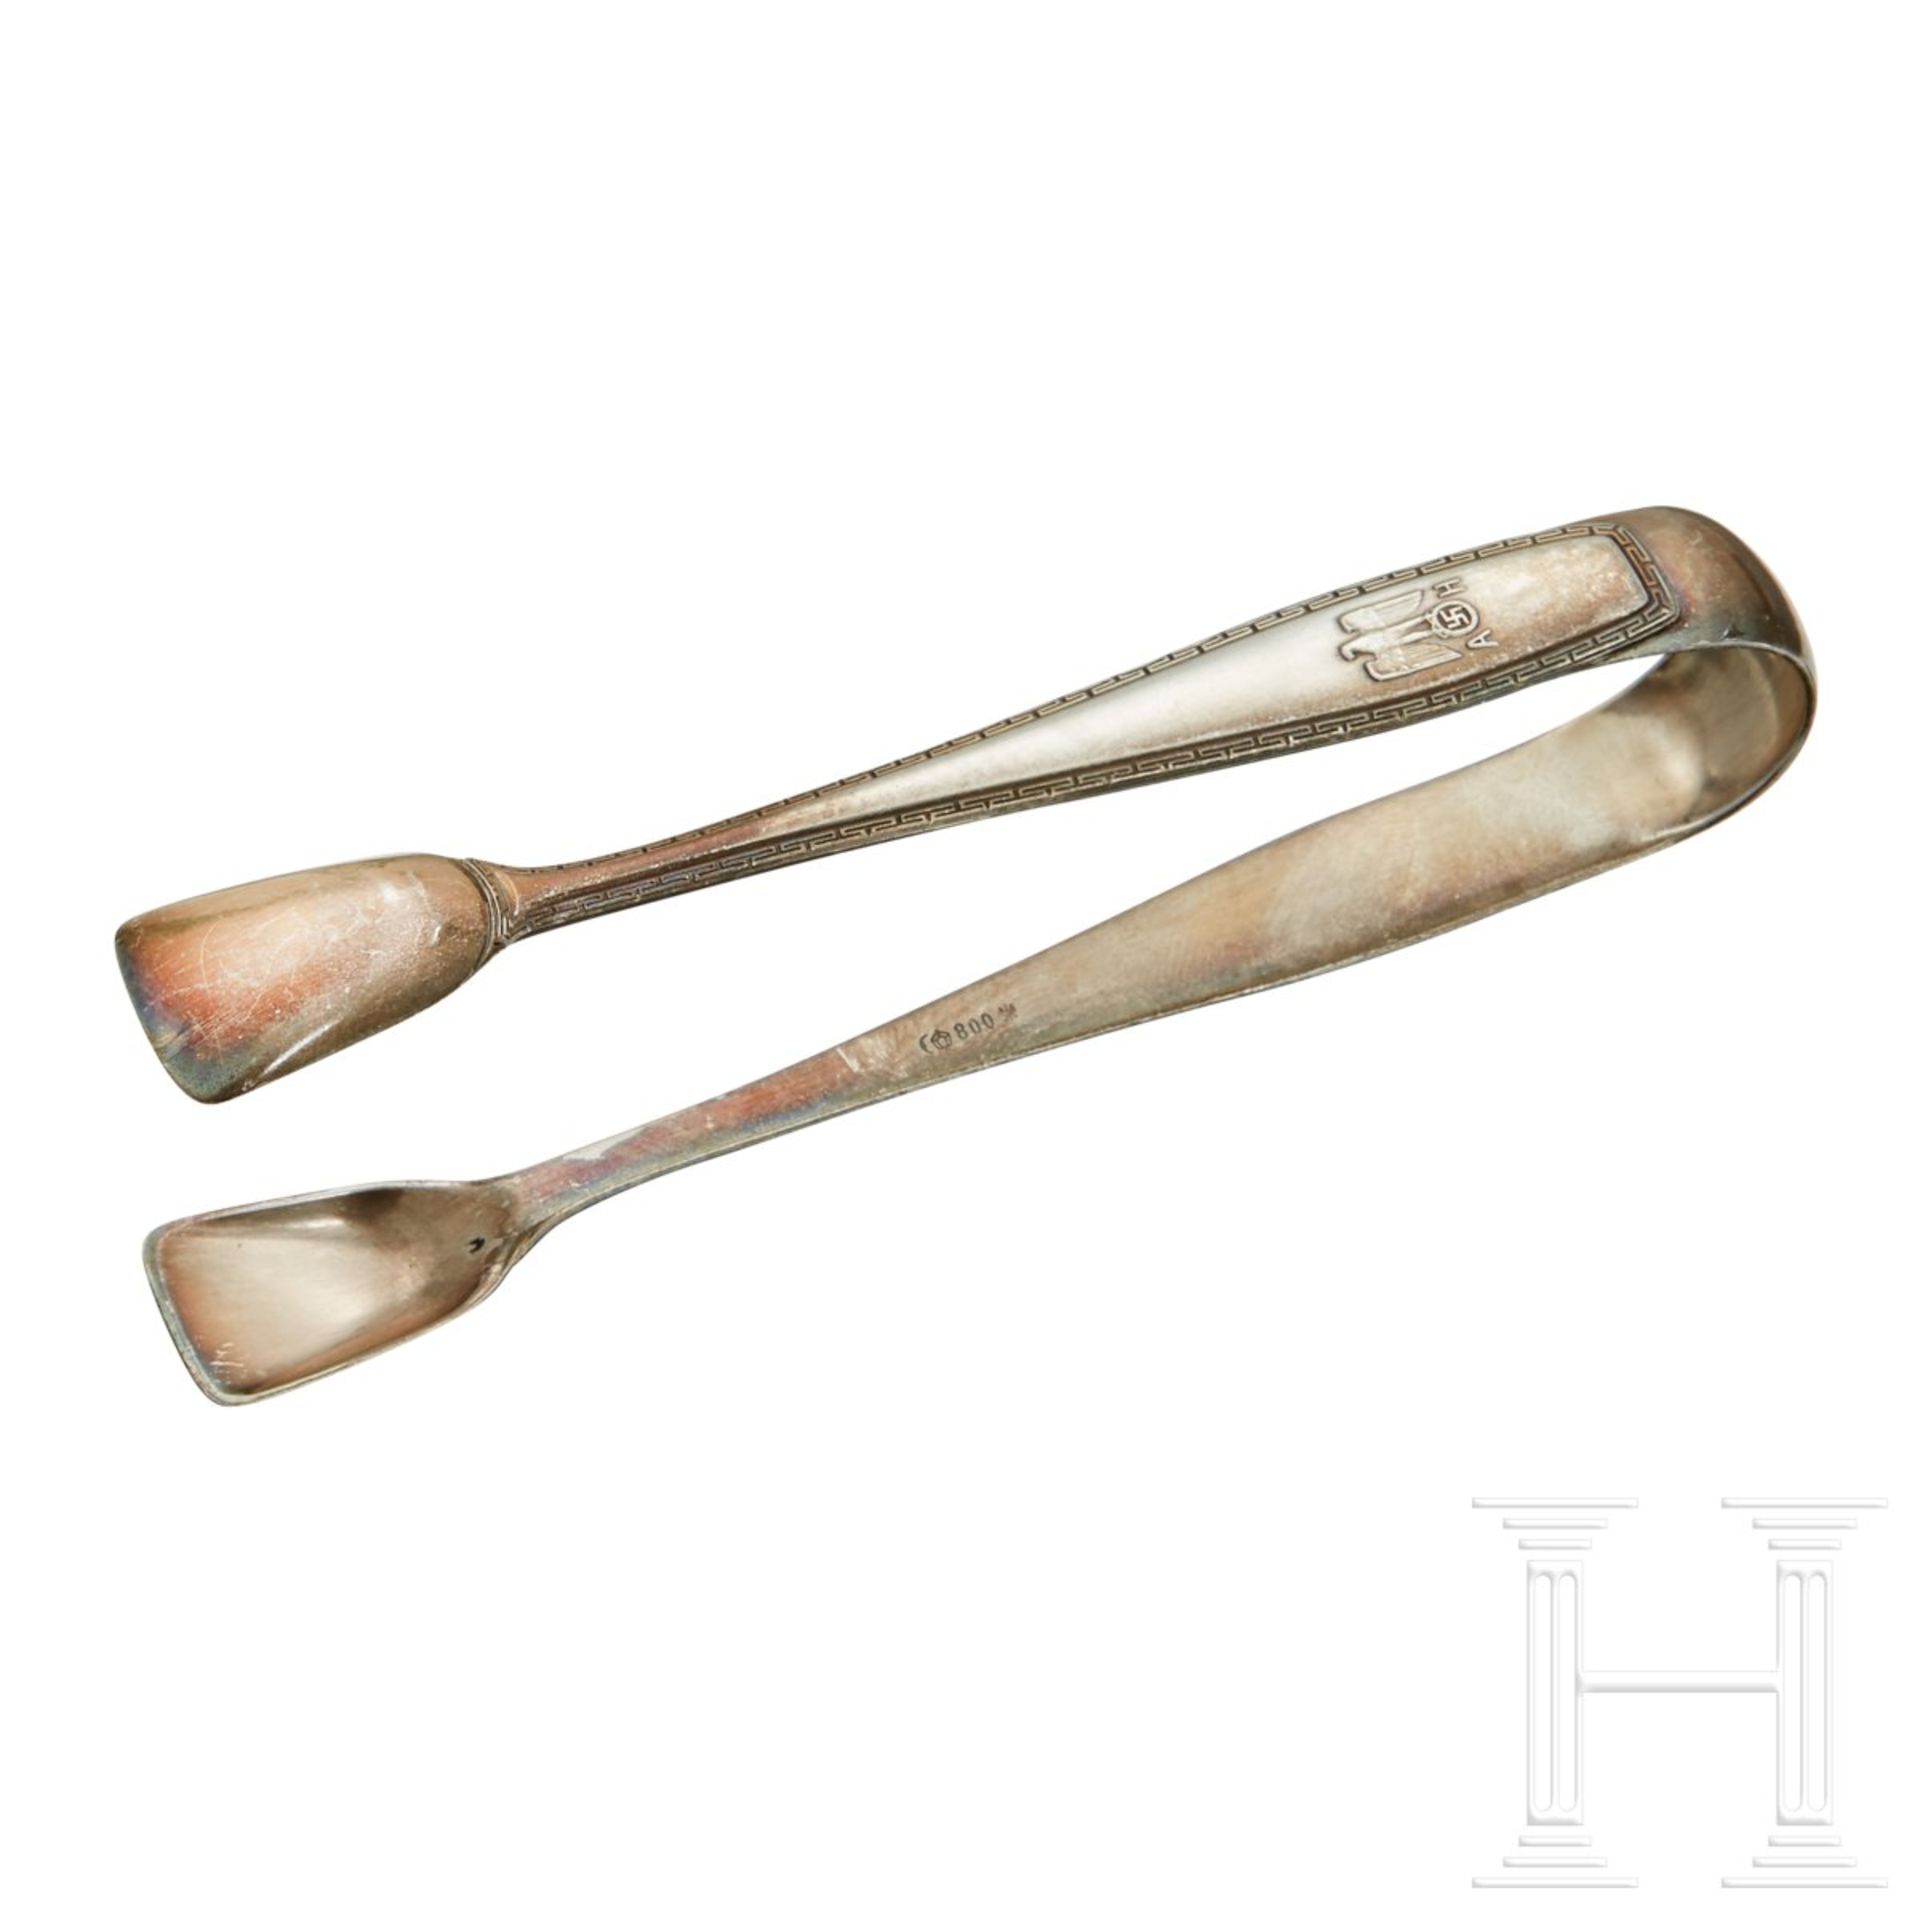 Adolf Hitler – Sugar Tongs from his personal silver service